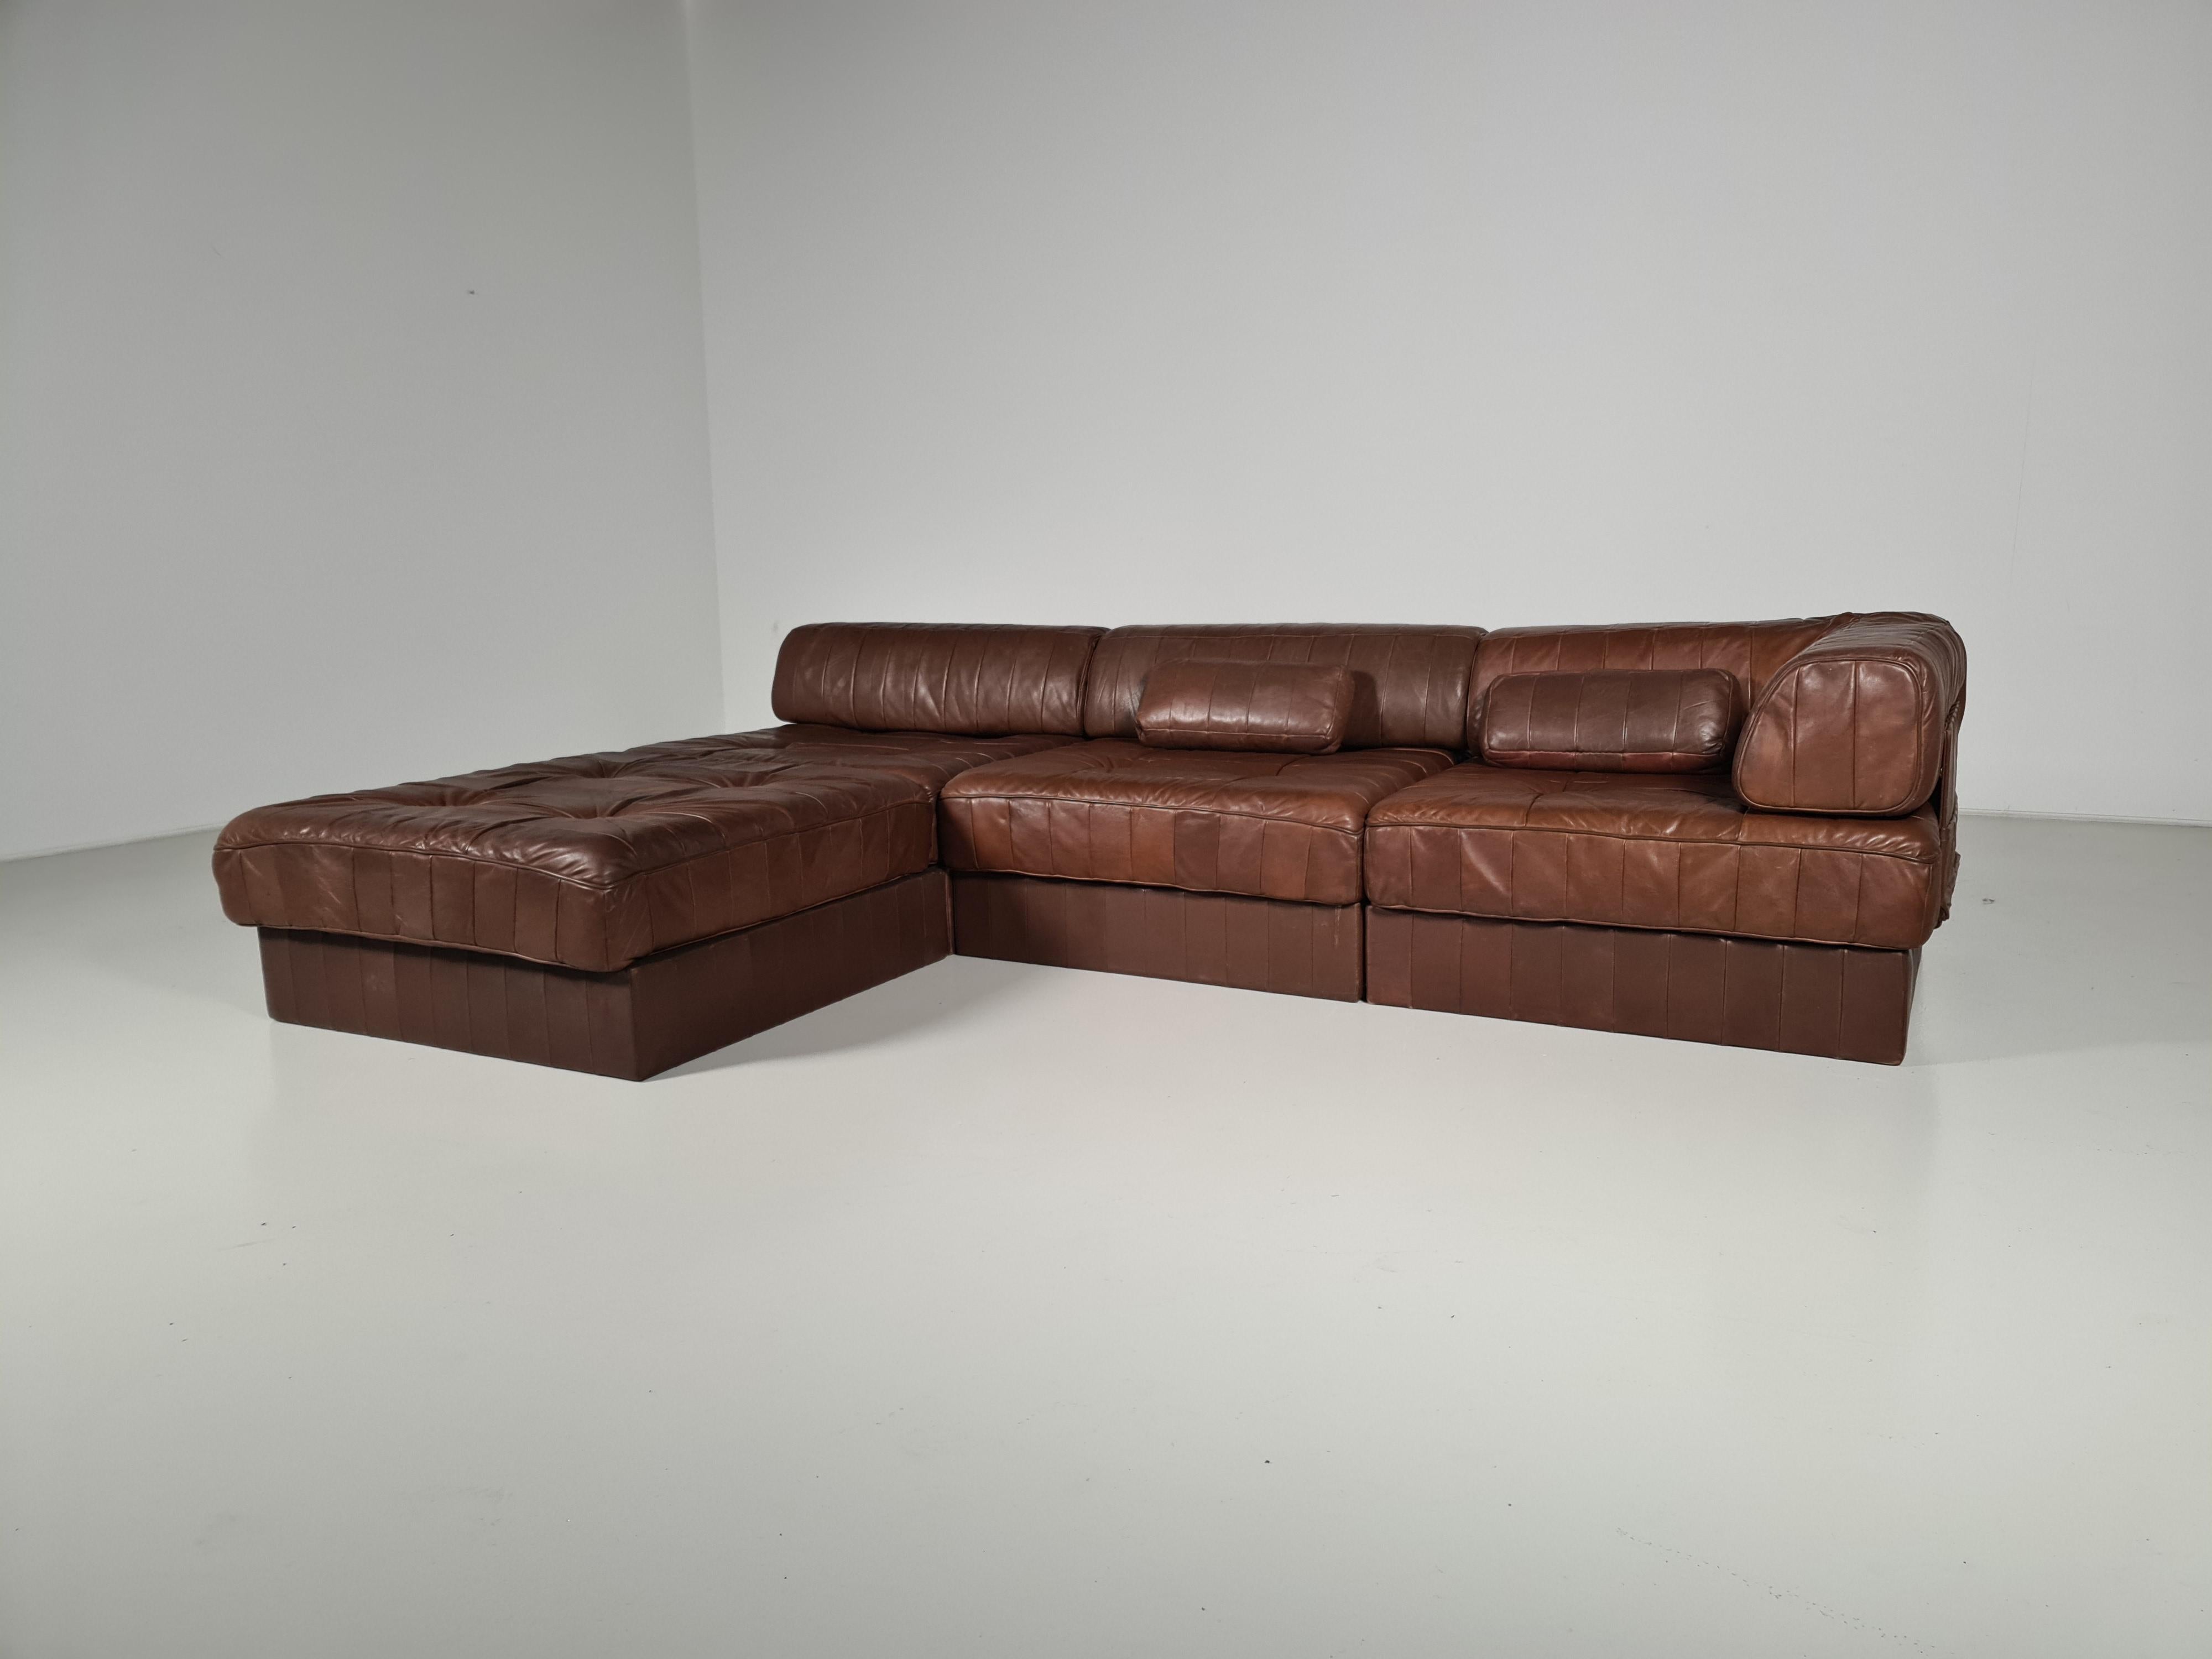 De Sede, modular sectional couch, DS-88, brown, patchwork leather. Hand-built in the 1970s to incredibly high standards by De Sede craftsman in Switzerland. Made of four sections and a table, each with a leather base, leather patchwork cushion and a